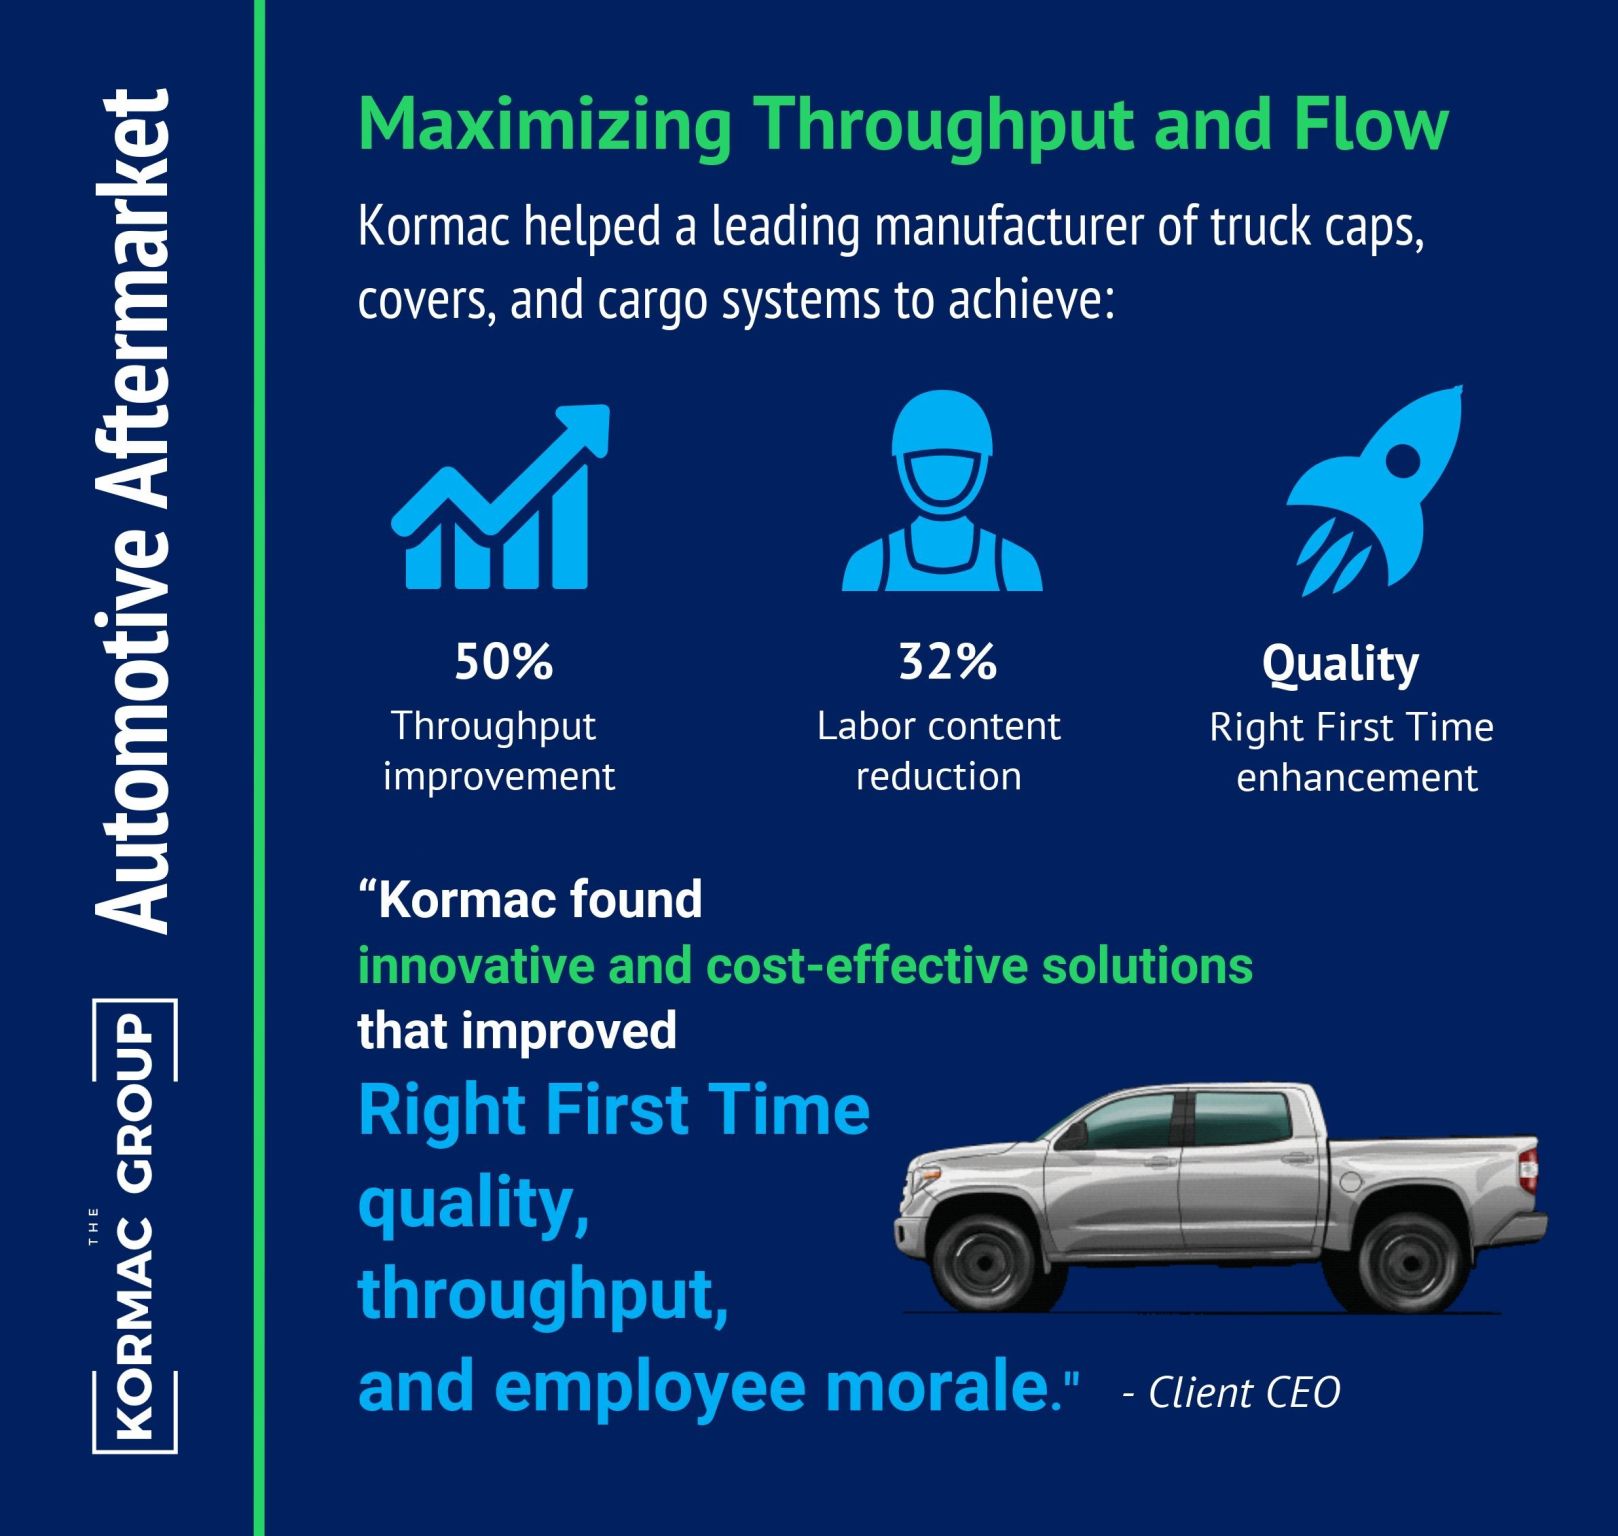 Automotive Aftermarket Maximizing Throughput and Flow Kormac helped a leading manufacturer of truck caps, covers, and cargo systems to achieve: - 50% throughput improvement - 32% labor content reduction - Quality: right first time enhancement "Kormac found innovative and cost-effective solutions that improved Right First Time quality, throughput, and employee morale." - Client CEO